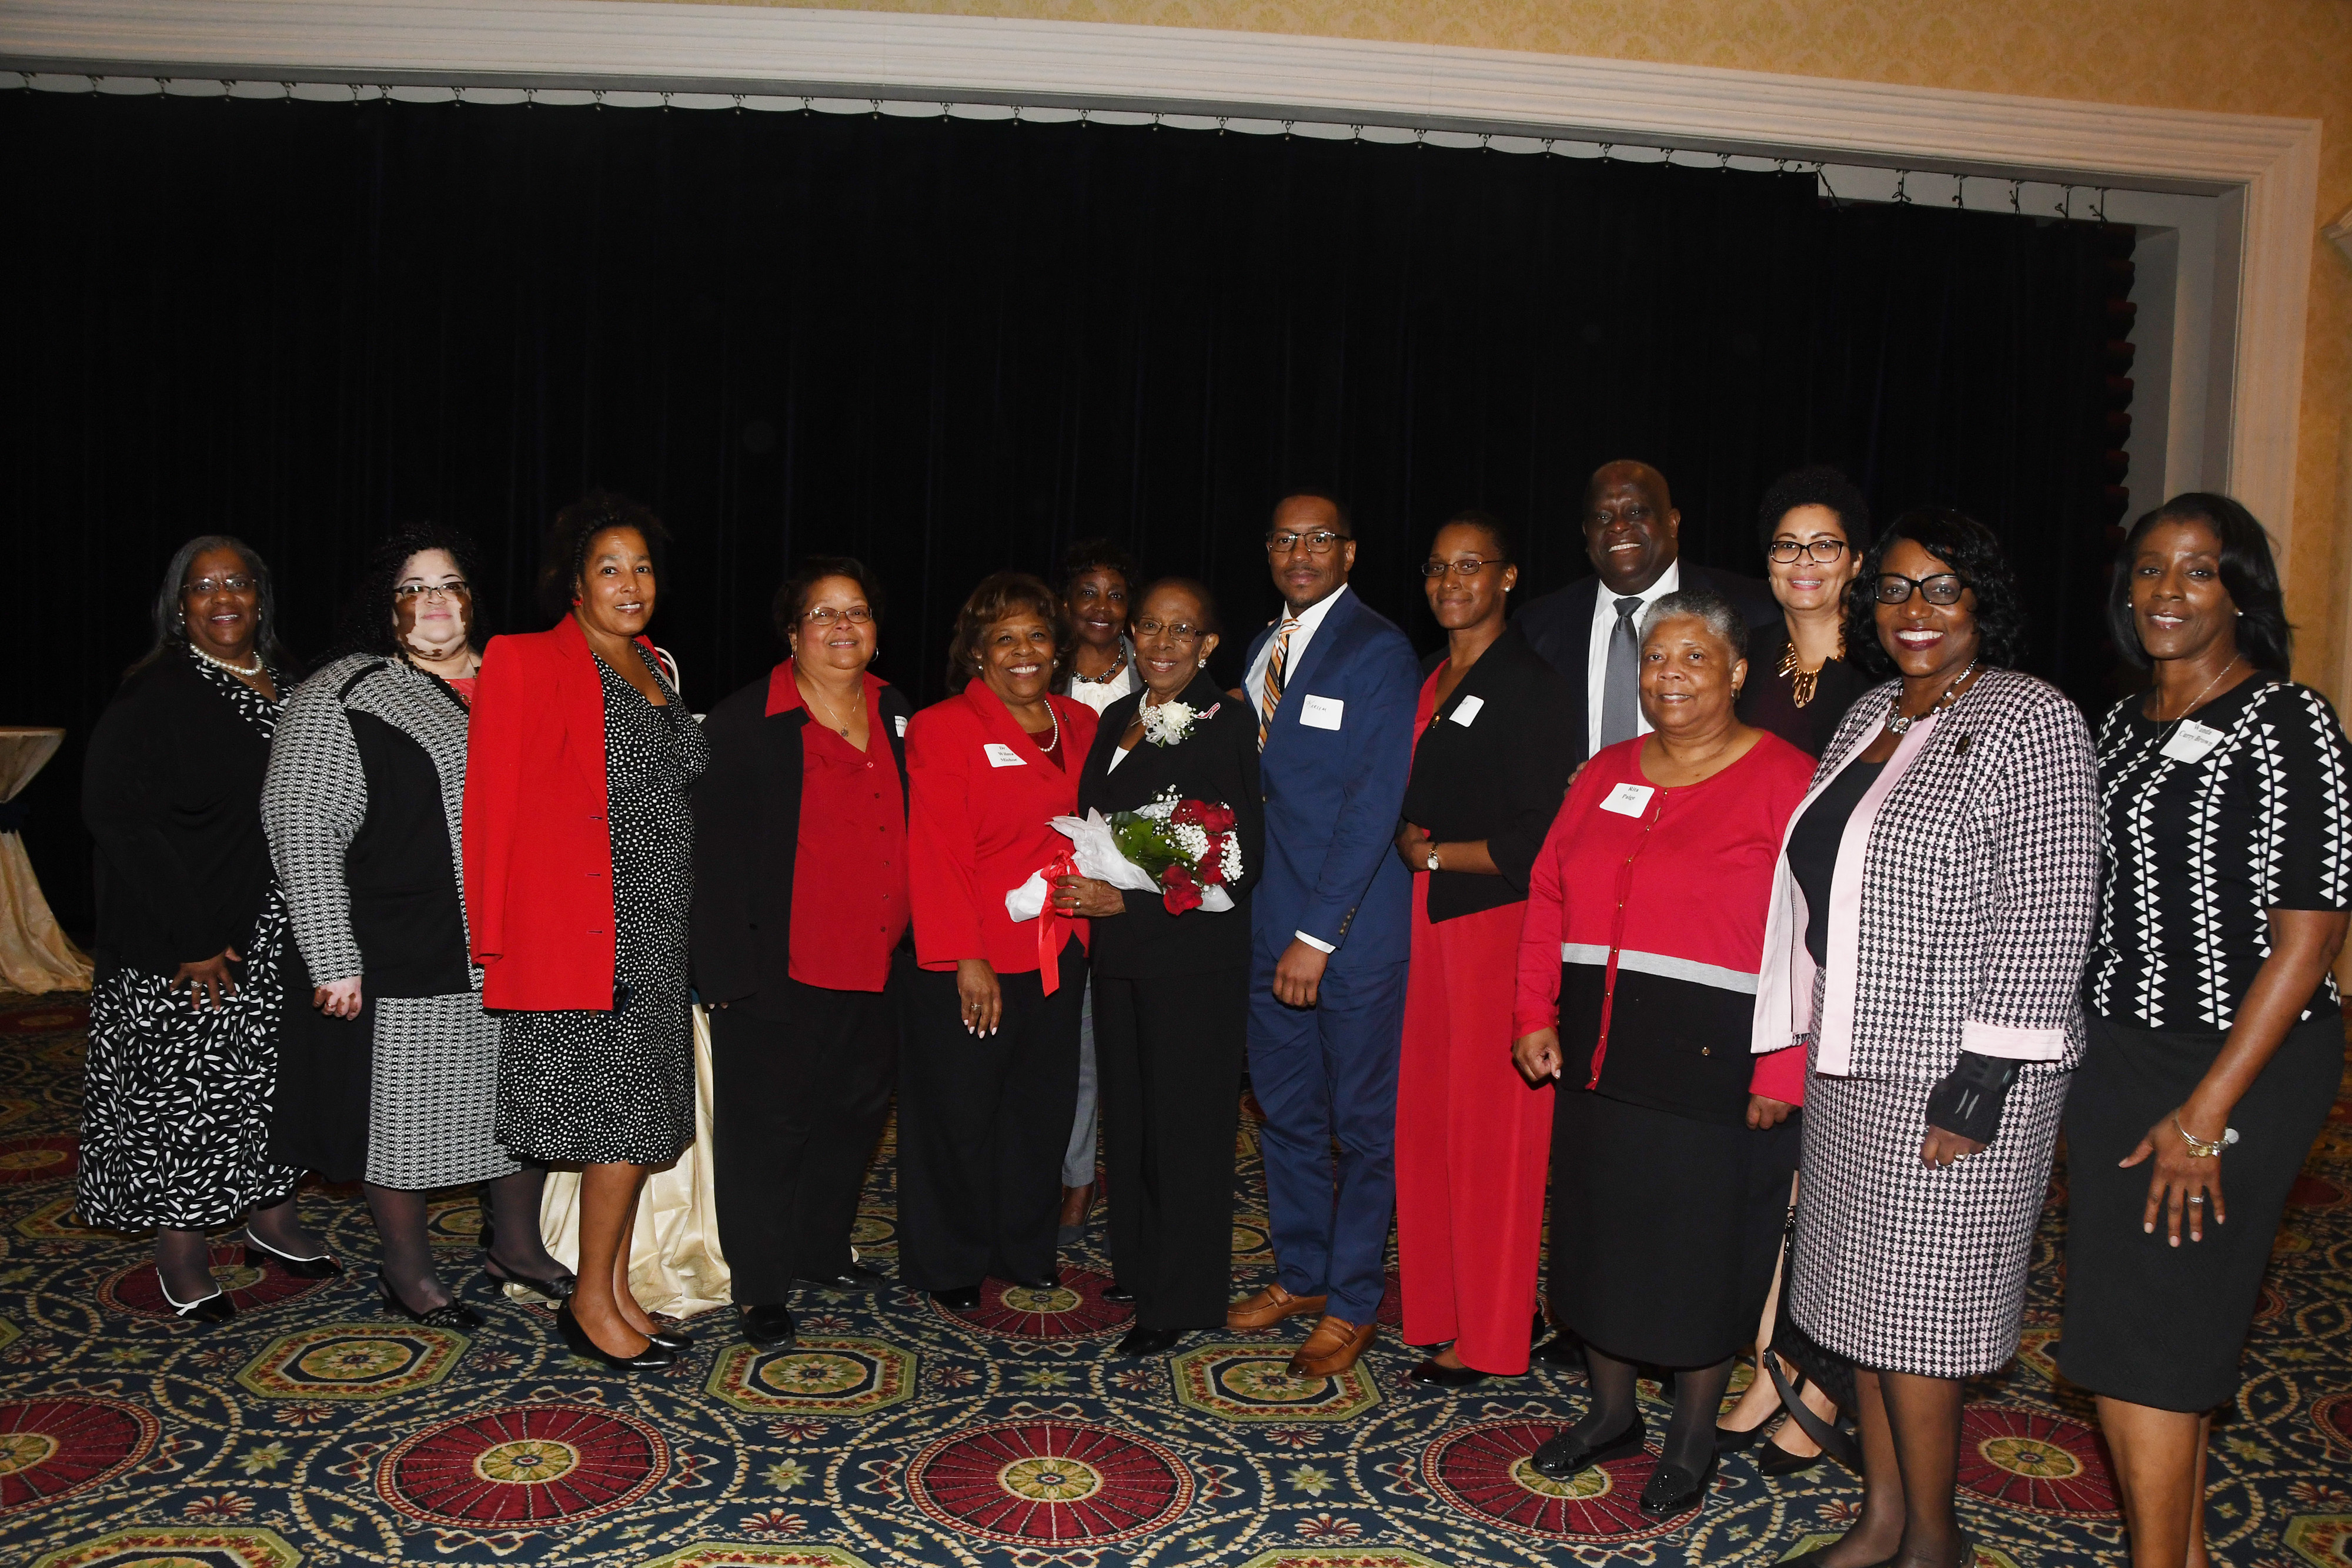 A healthy contingent of the Delaware State University community showed up to witness alumna Dr. Reba Hollingsworth's induction into the Hall of Fame of Delaware Women during a ceremony at Dover Downs Hotel & Casino.